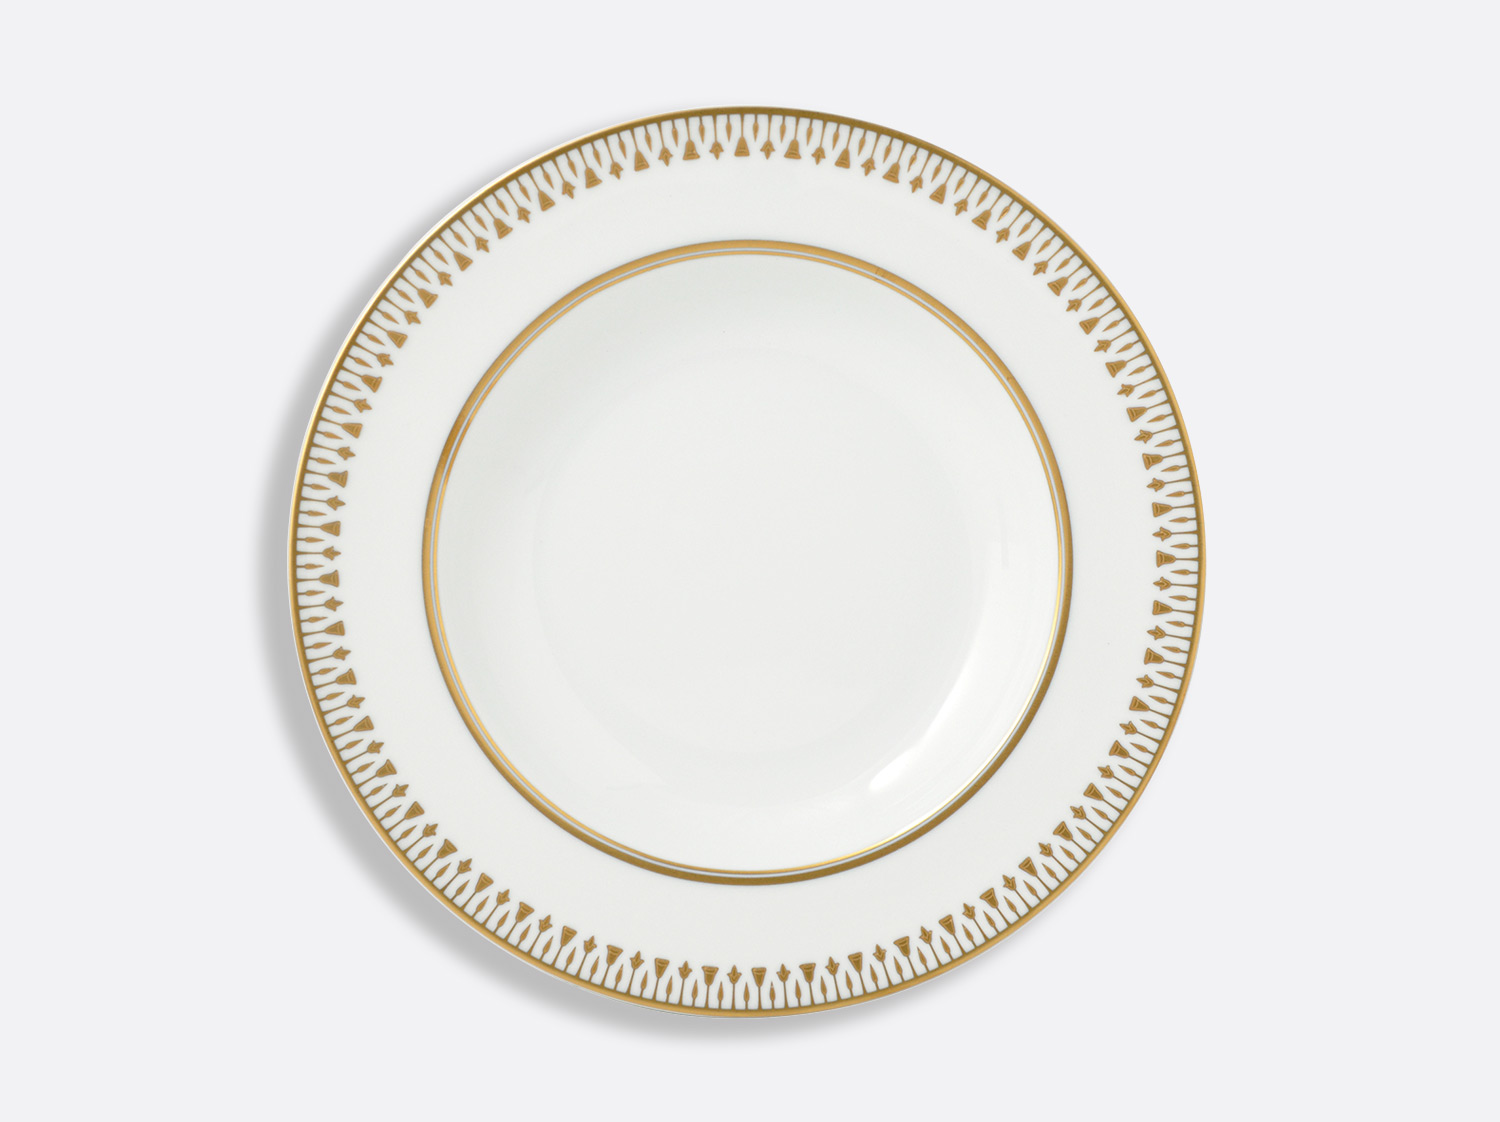 China Rim soup 9" of the collection Soleil levant | Bernardaud